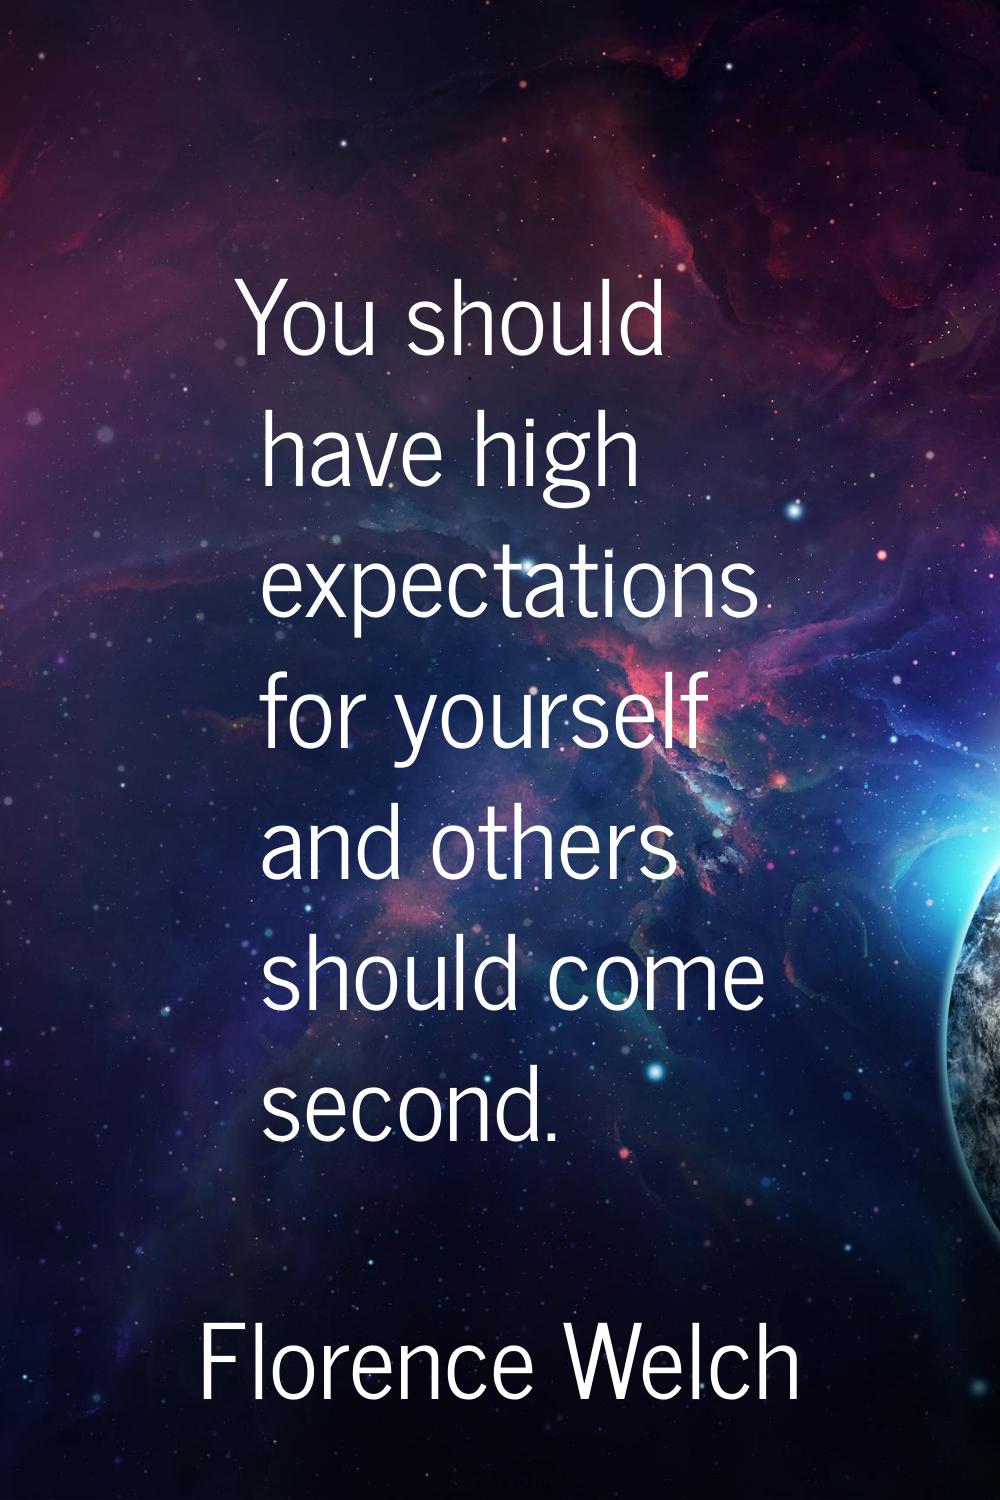 You should have high expectations for yourself and others should come second.